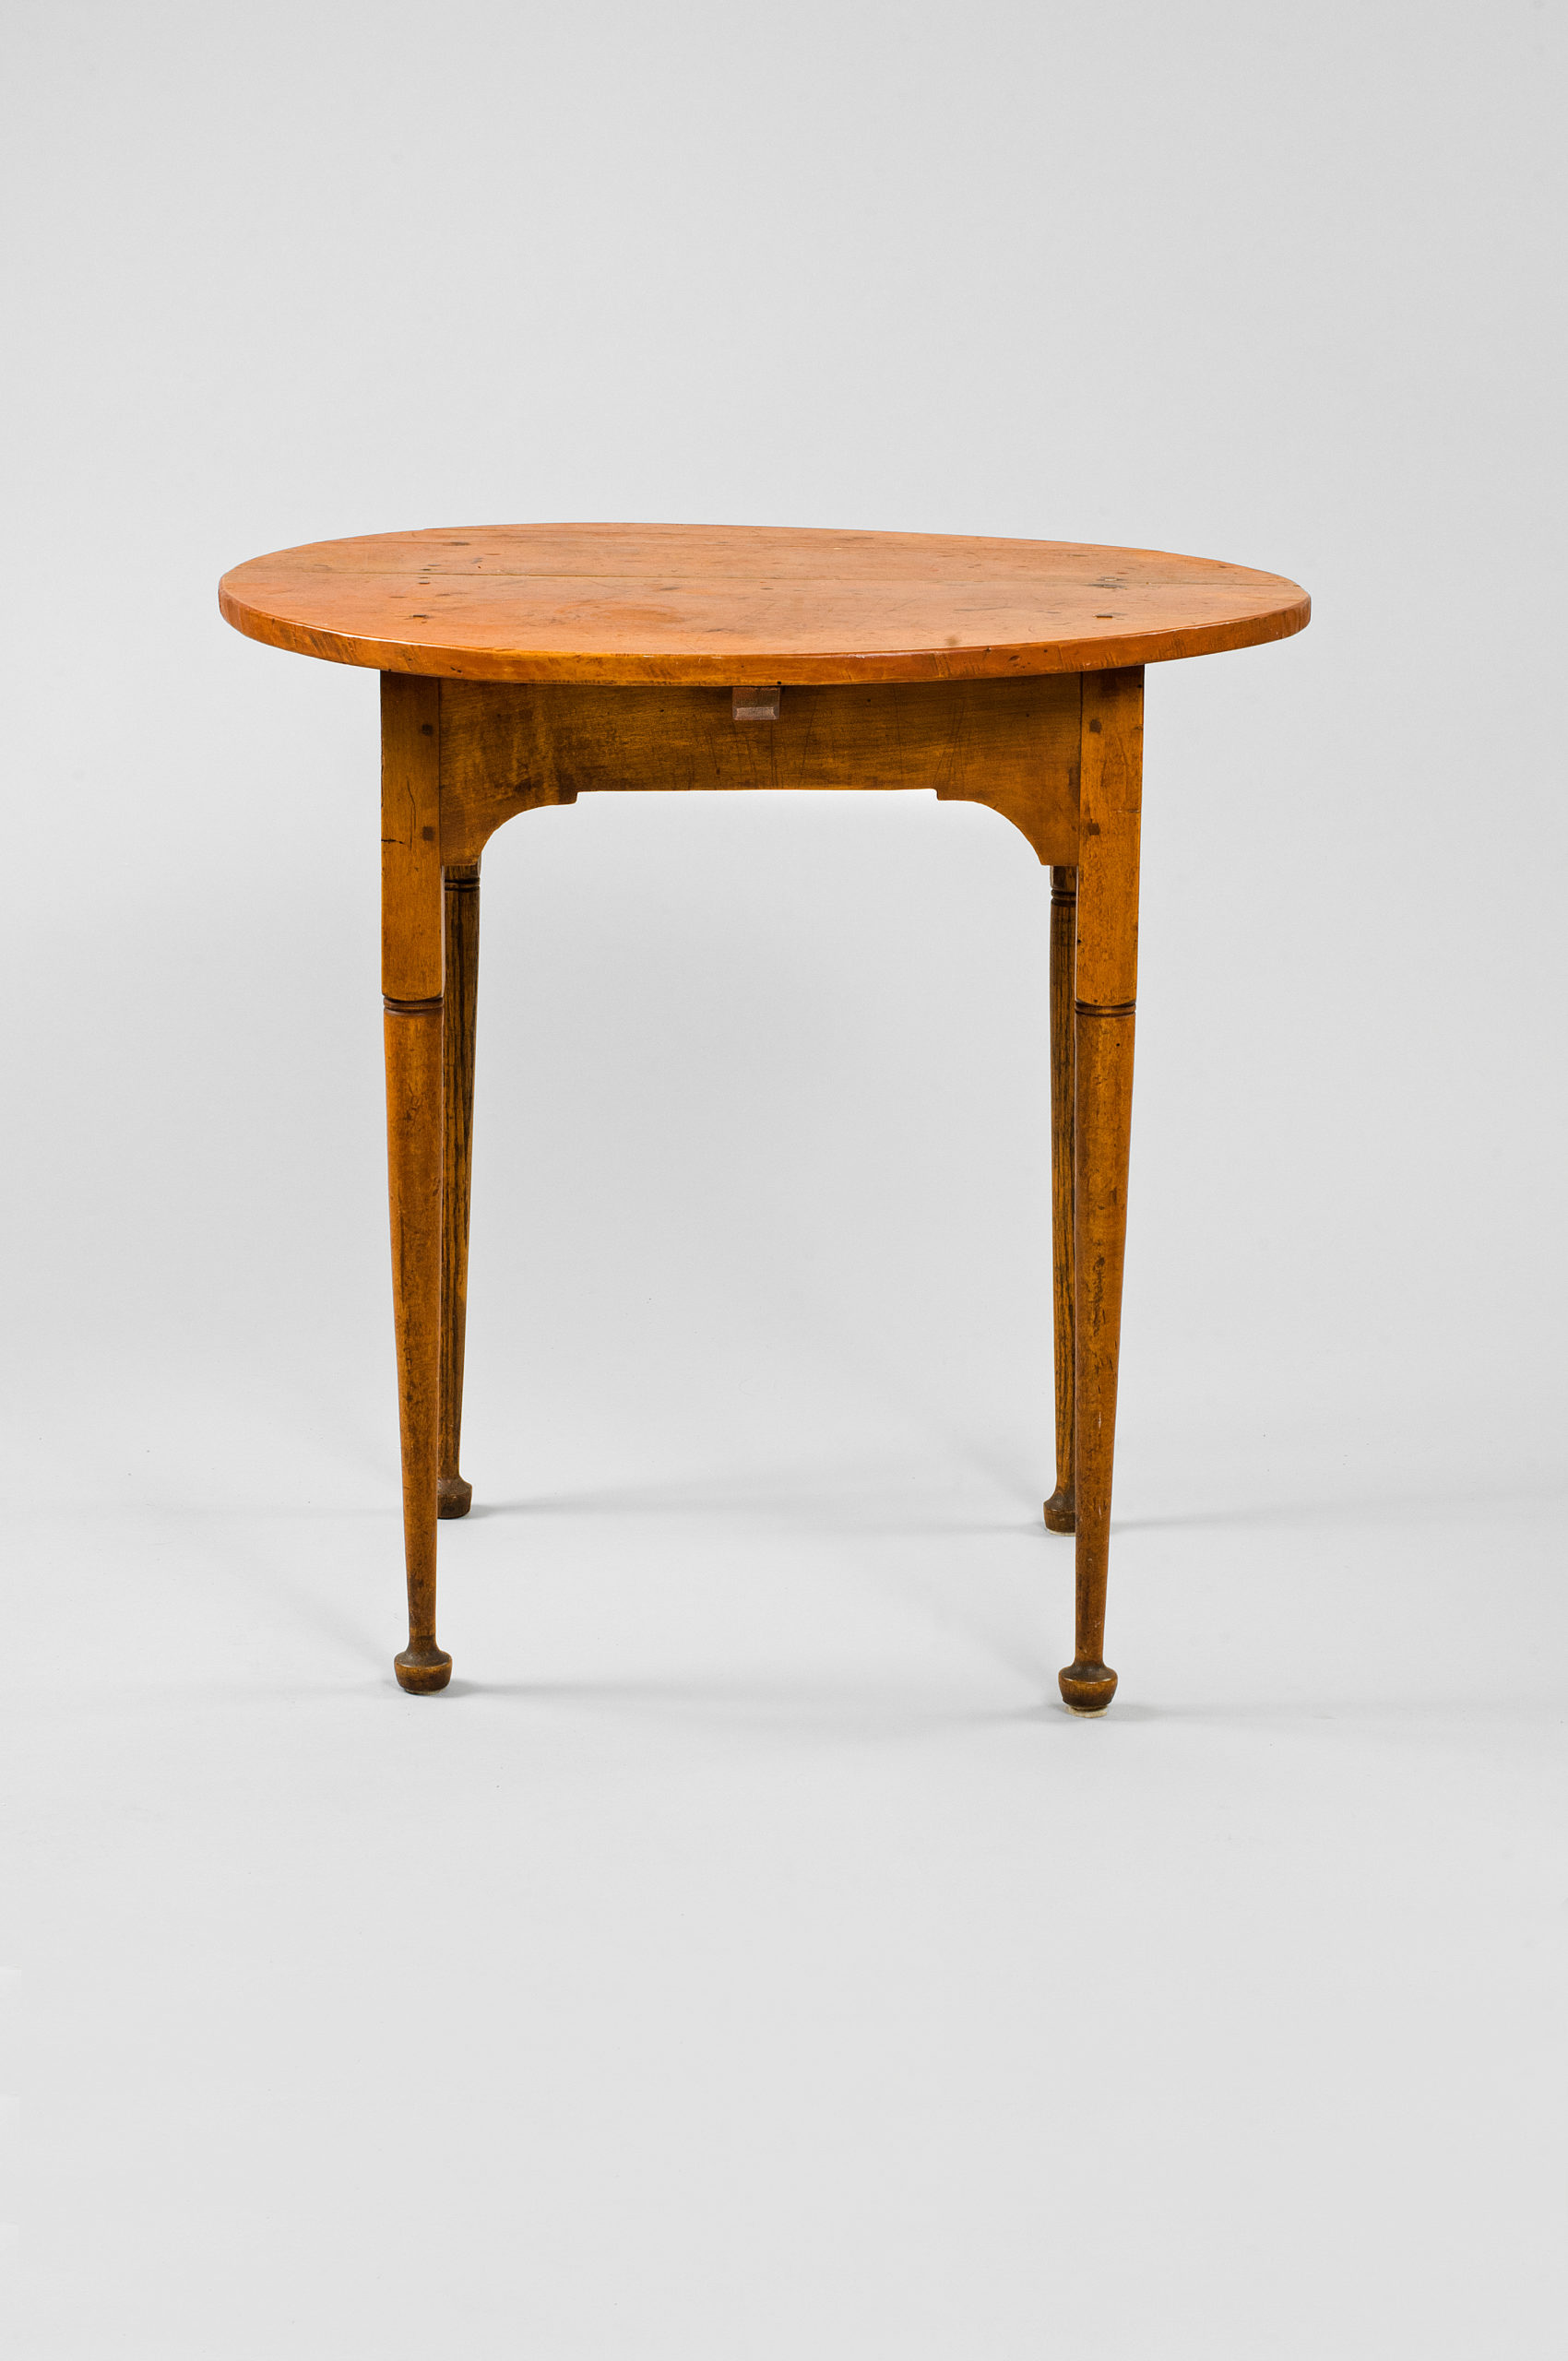 Small, four-legged, wooden table made out of maple with a warm, slightly orange finish.